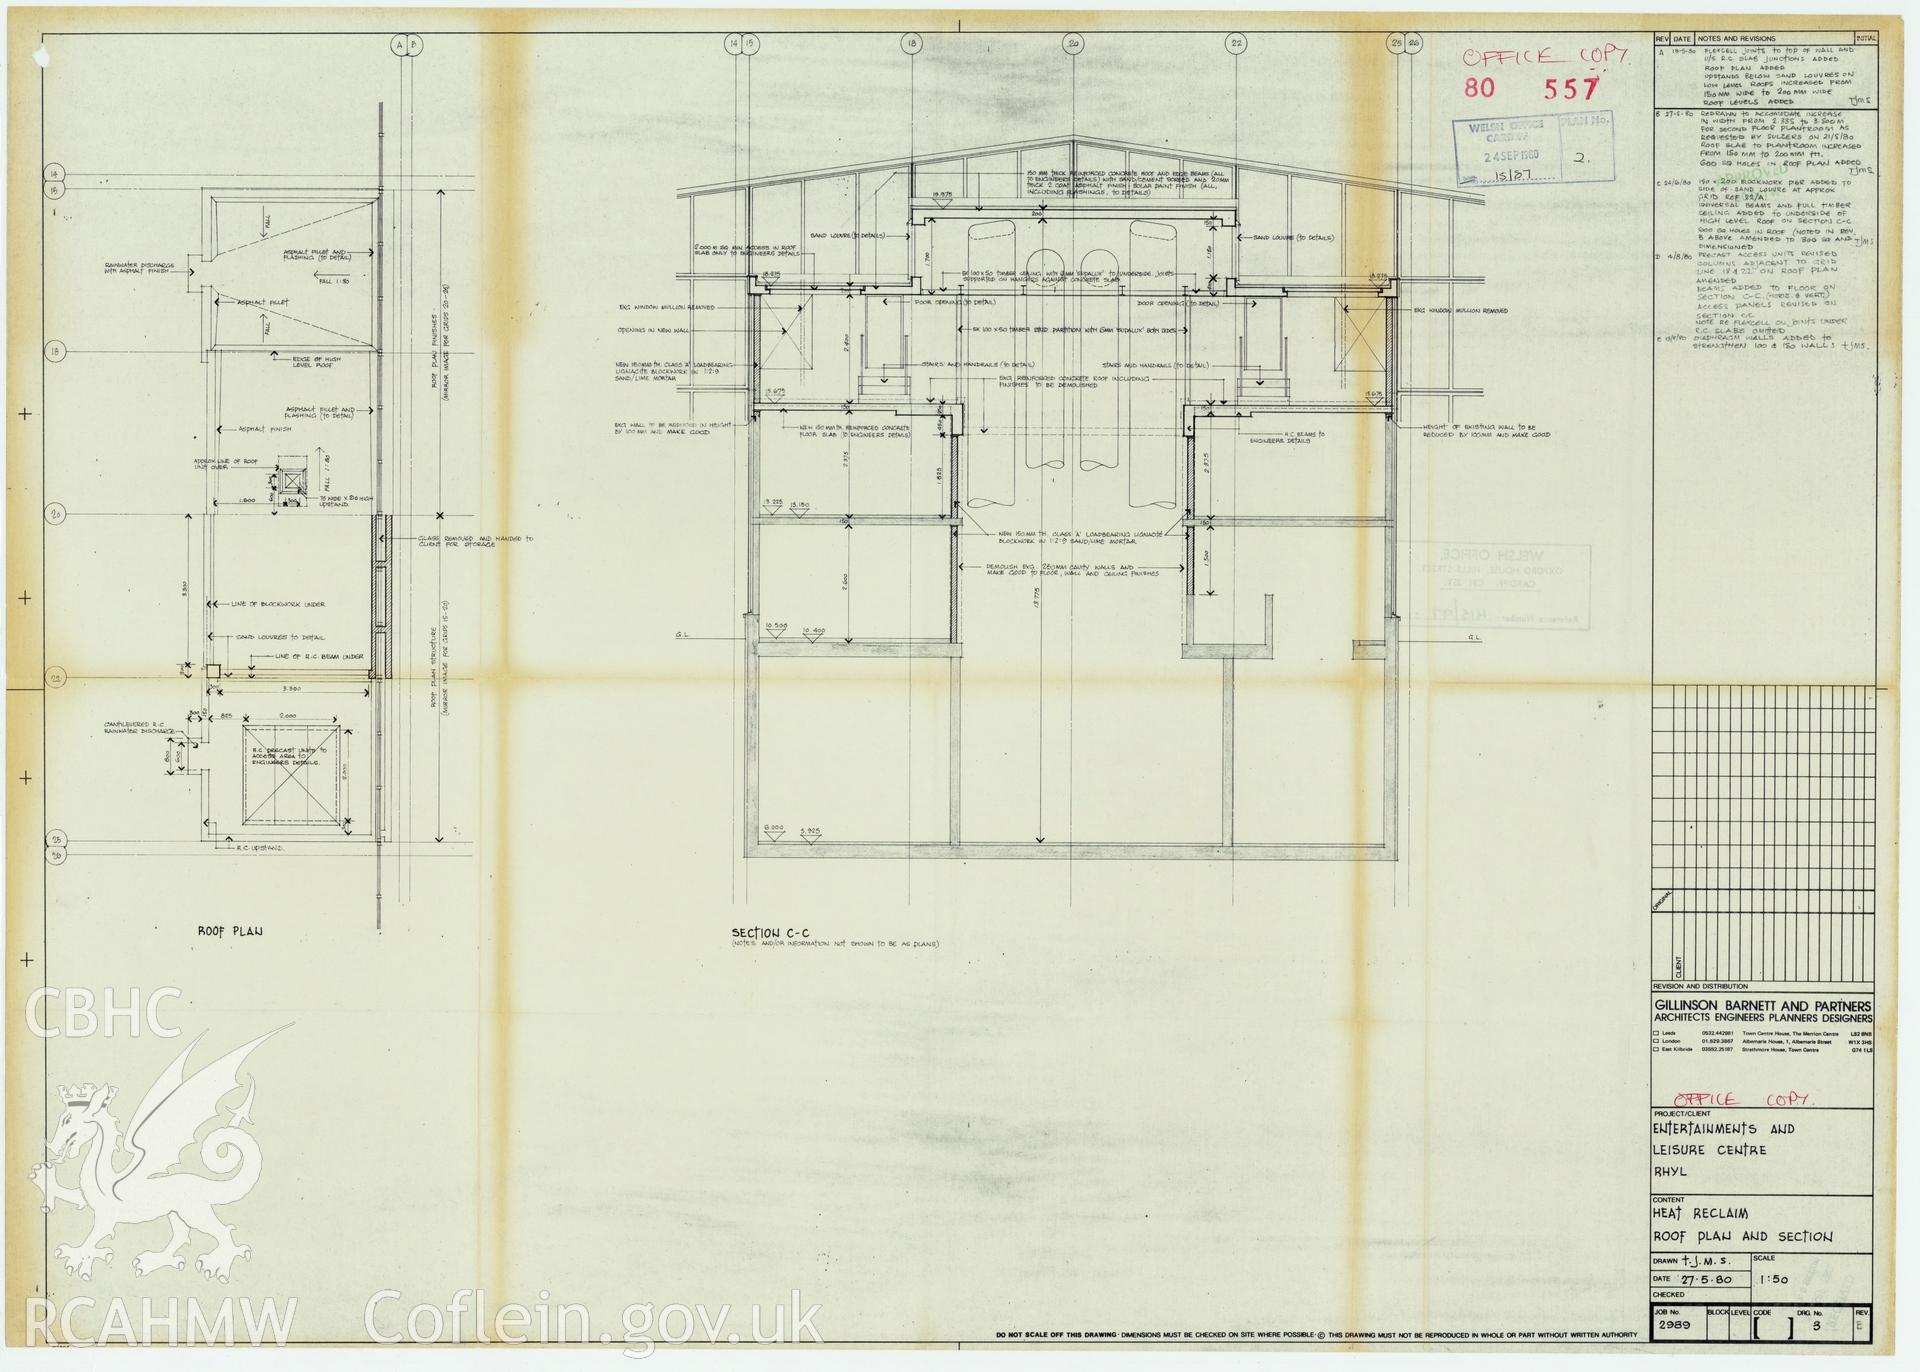 Digital copy of a measured drawing showing heat reclamation plan and section for the roof of the entertainment complex at Rhyl Sun Centre and Theatre, produced by Gillinson Barnett & Partners  1980. Loaned for copying by Denbighshire County Council.